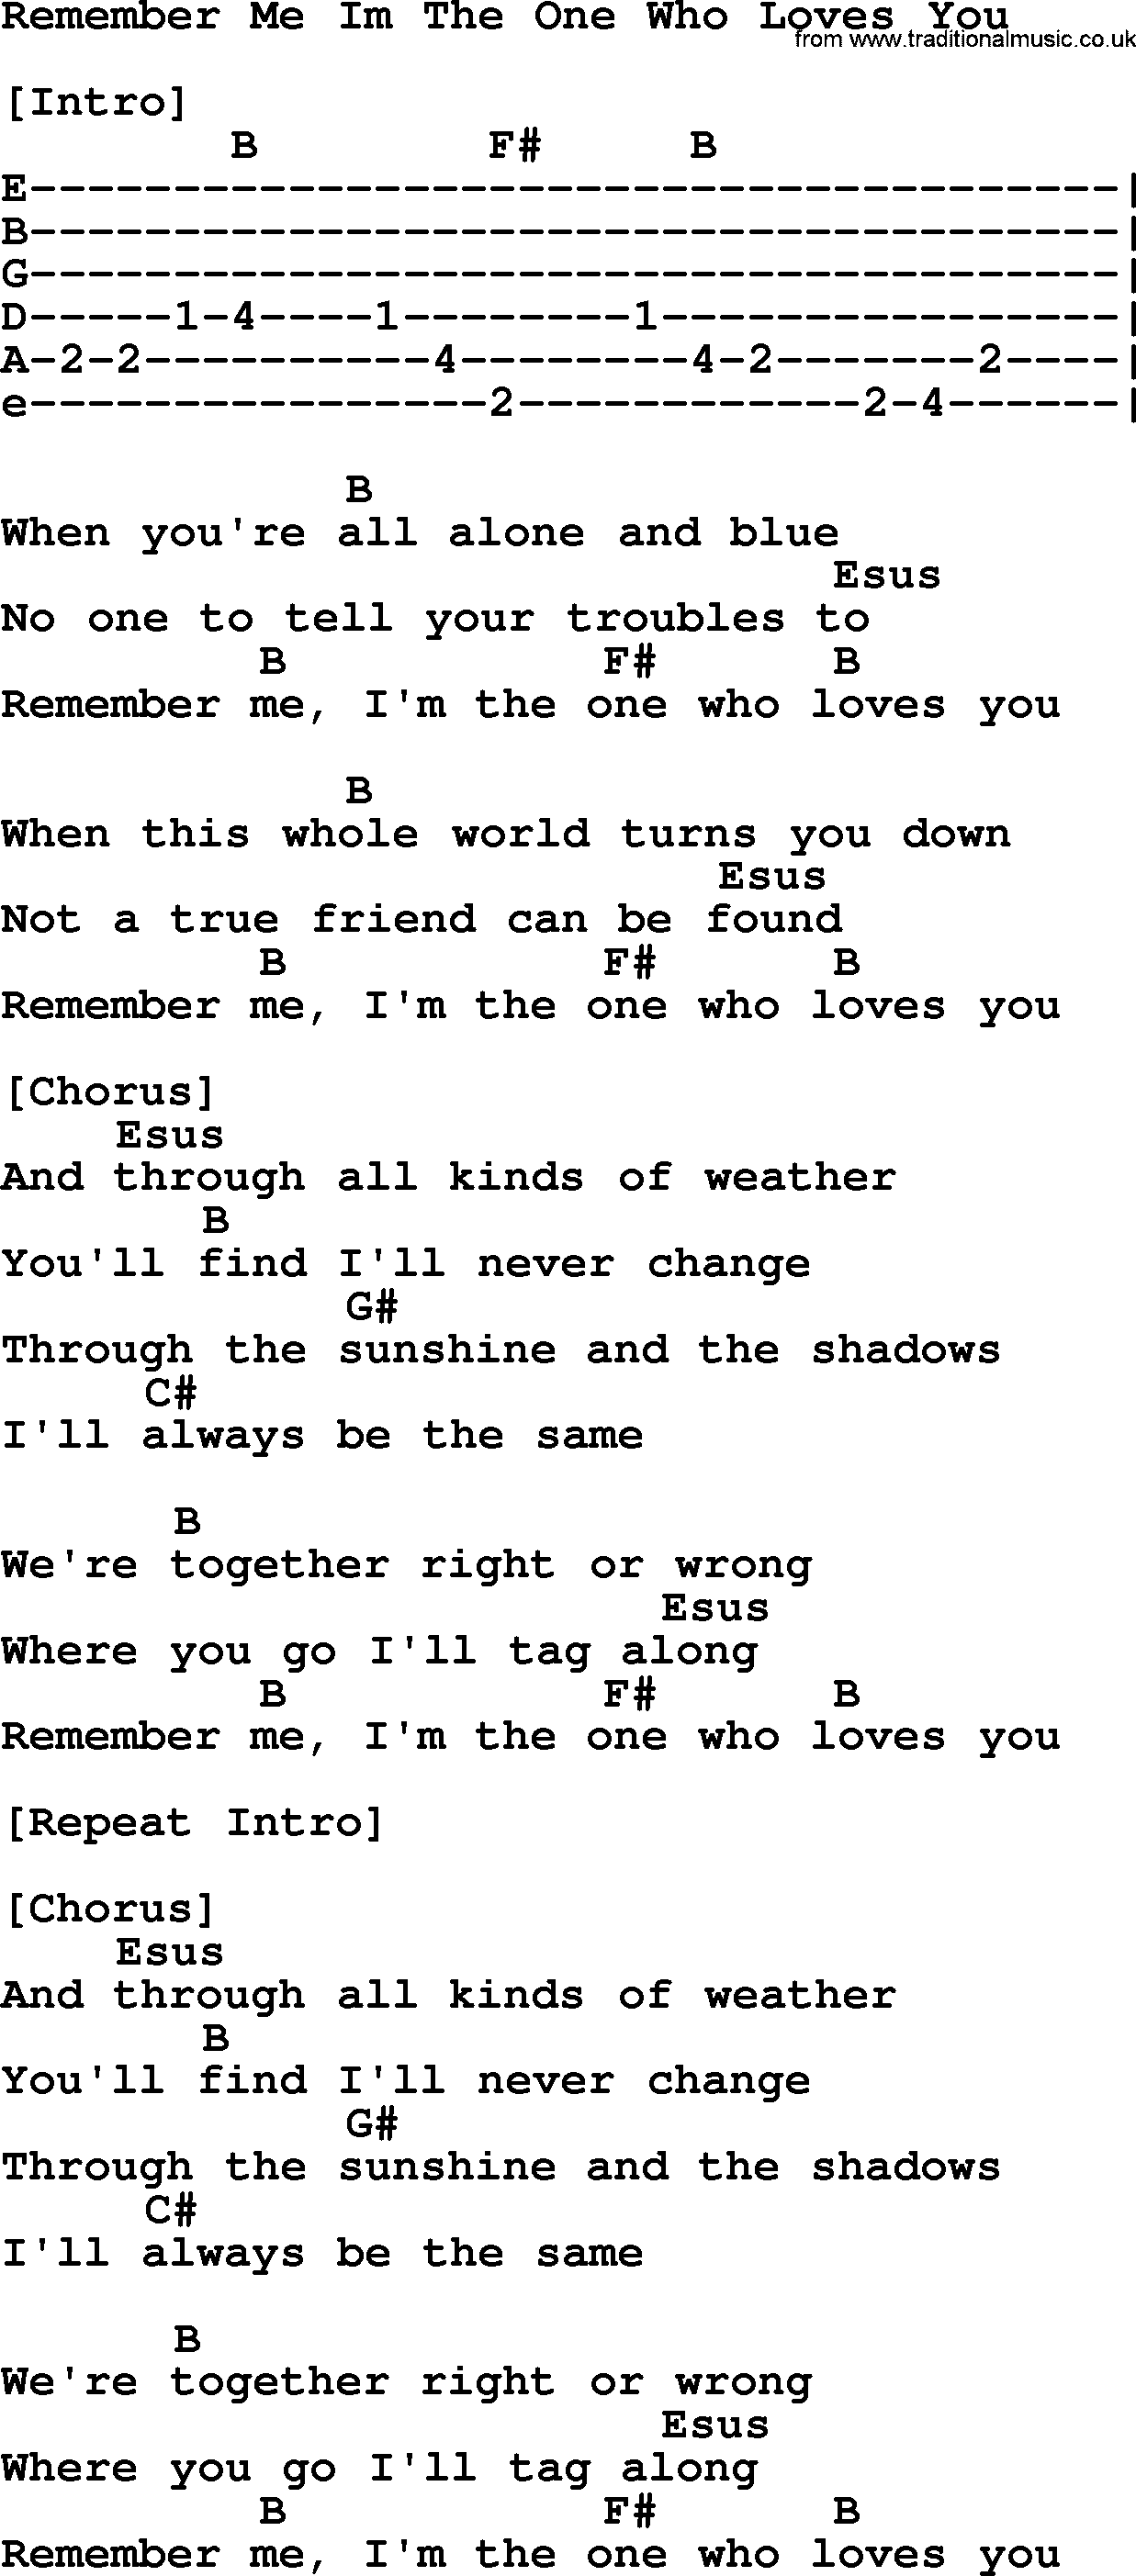 Johnny Cash song Remember Me Im The One Who Loves You, lyrics and chords